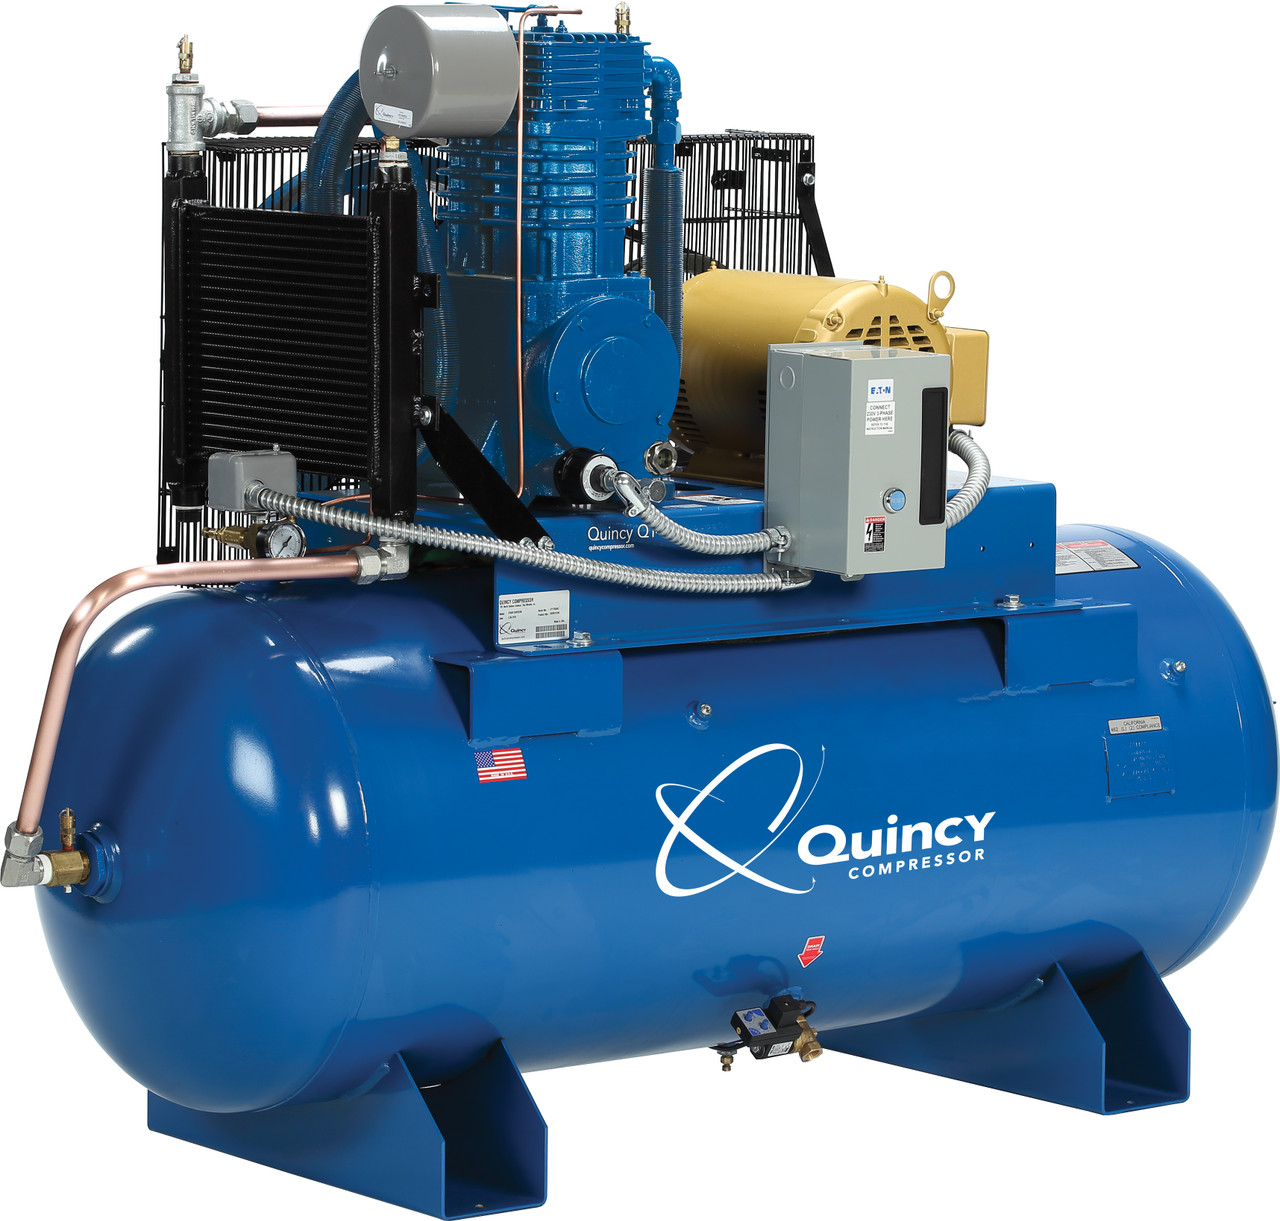 Quincy P2103DS12HCB46M 10 HP MAX, 460 Volt Three Phase, Two Stage, 120 Gallon Horizontal Air Compressor